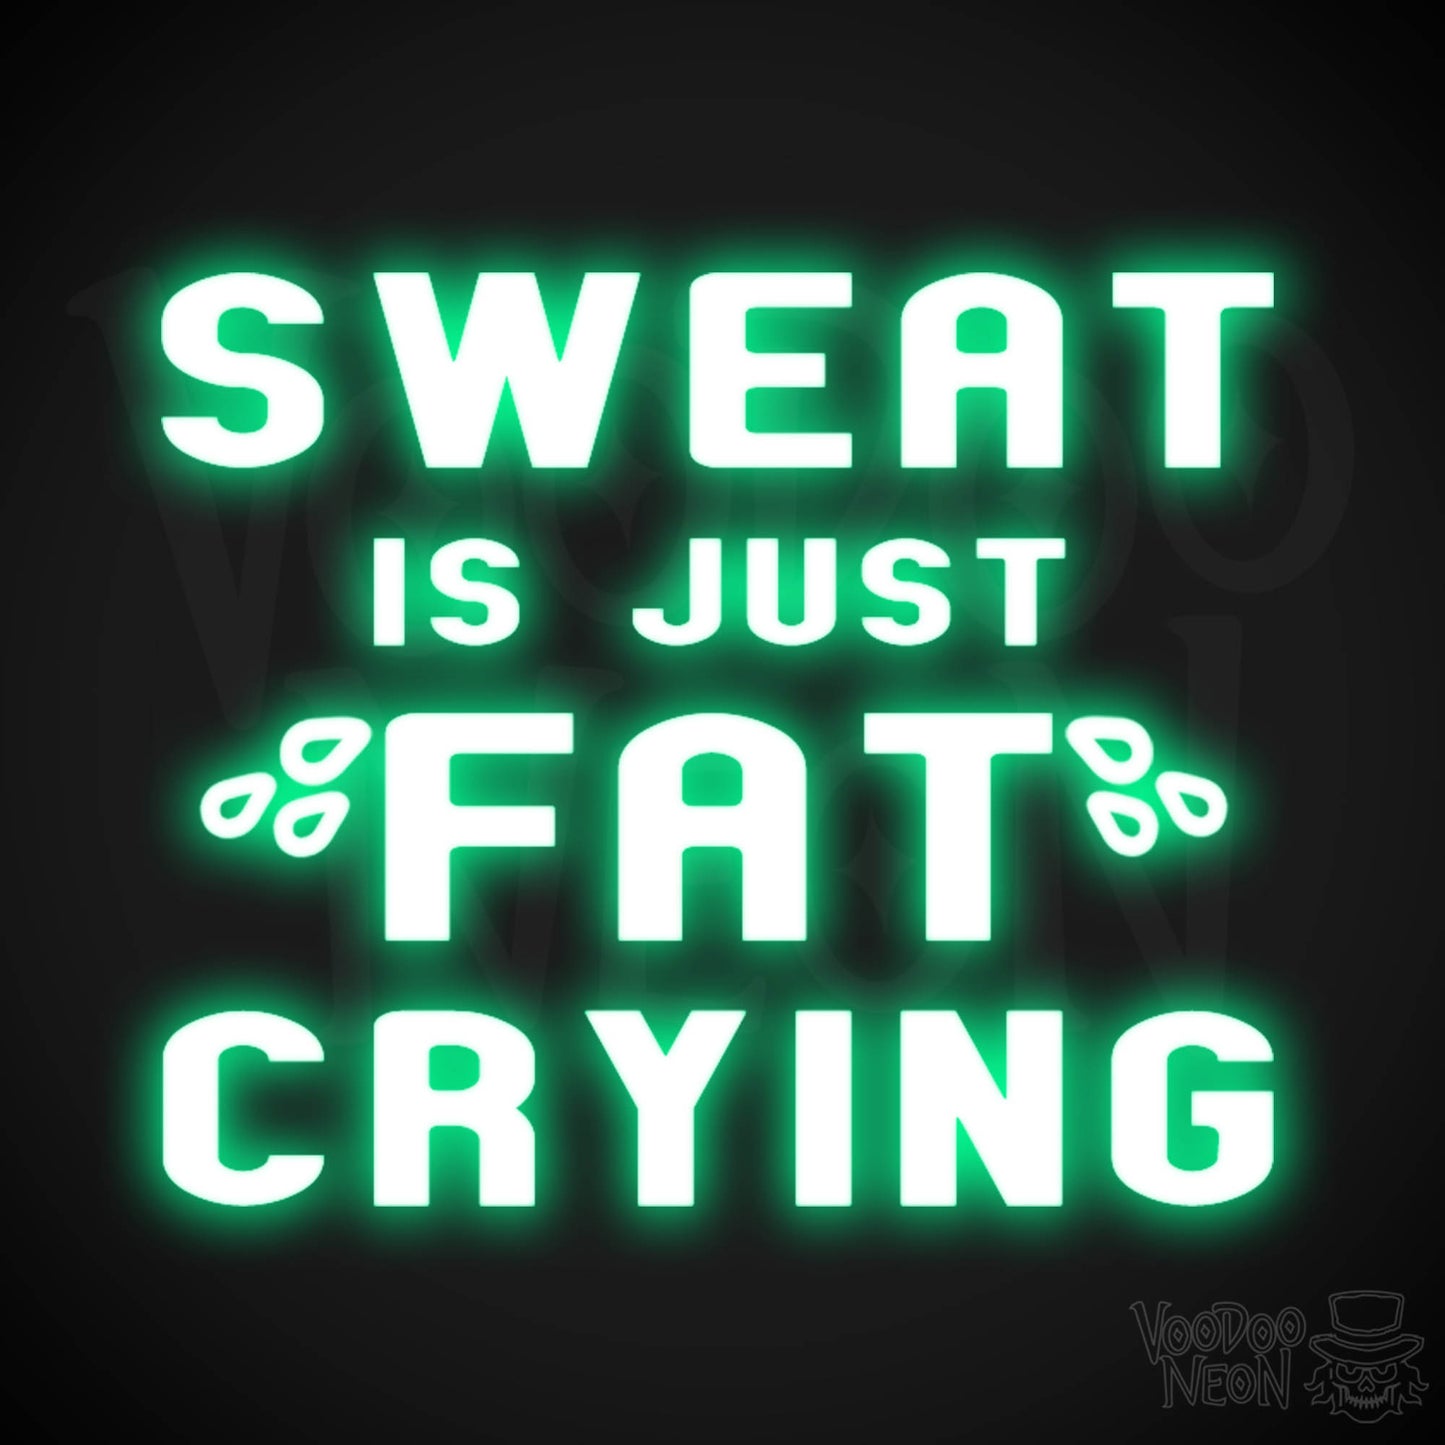 Sweat Is Just Fat Crying Neon Sign - Sweat Is Just Fat Crying Sign - LED Lights - Color Green